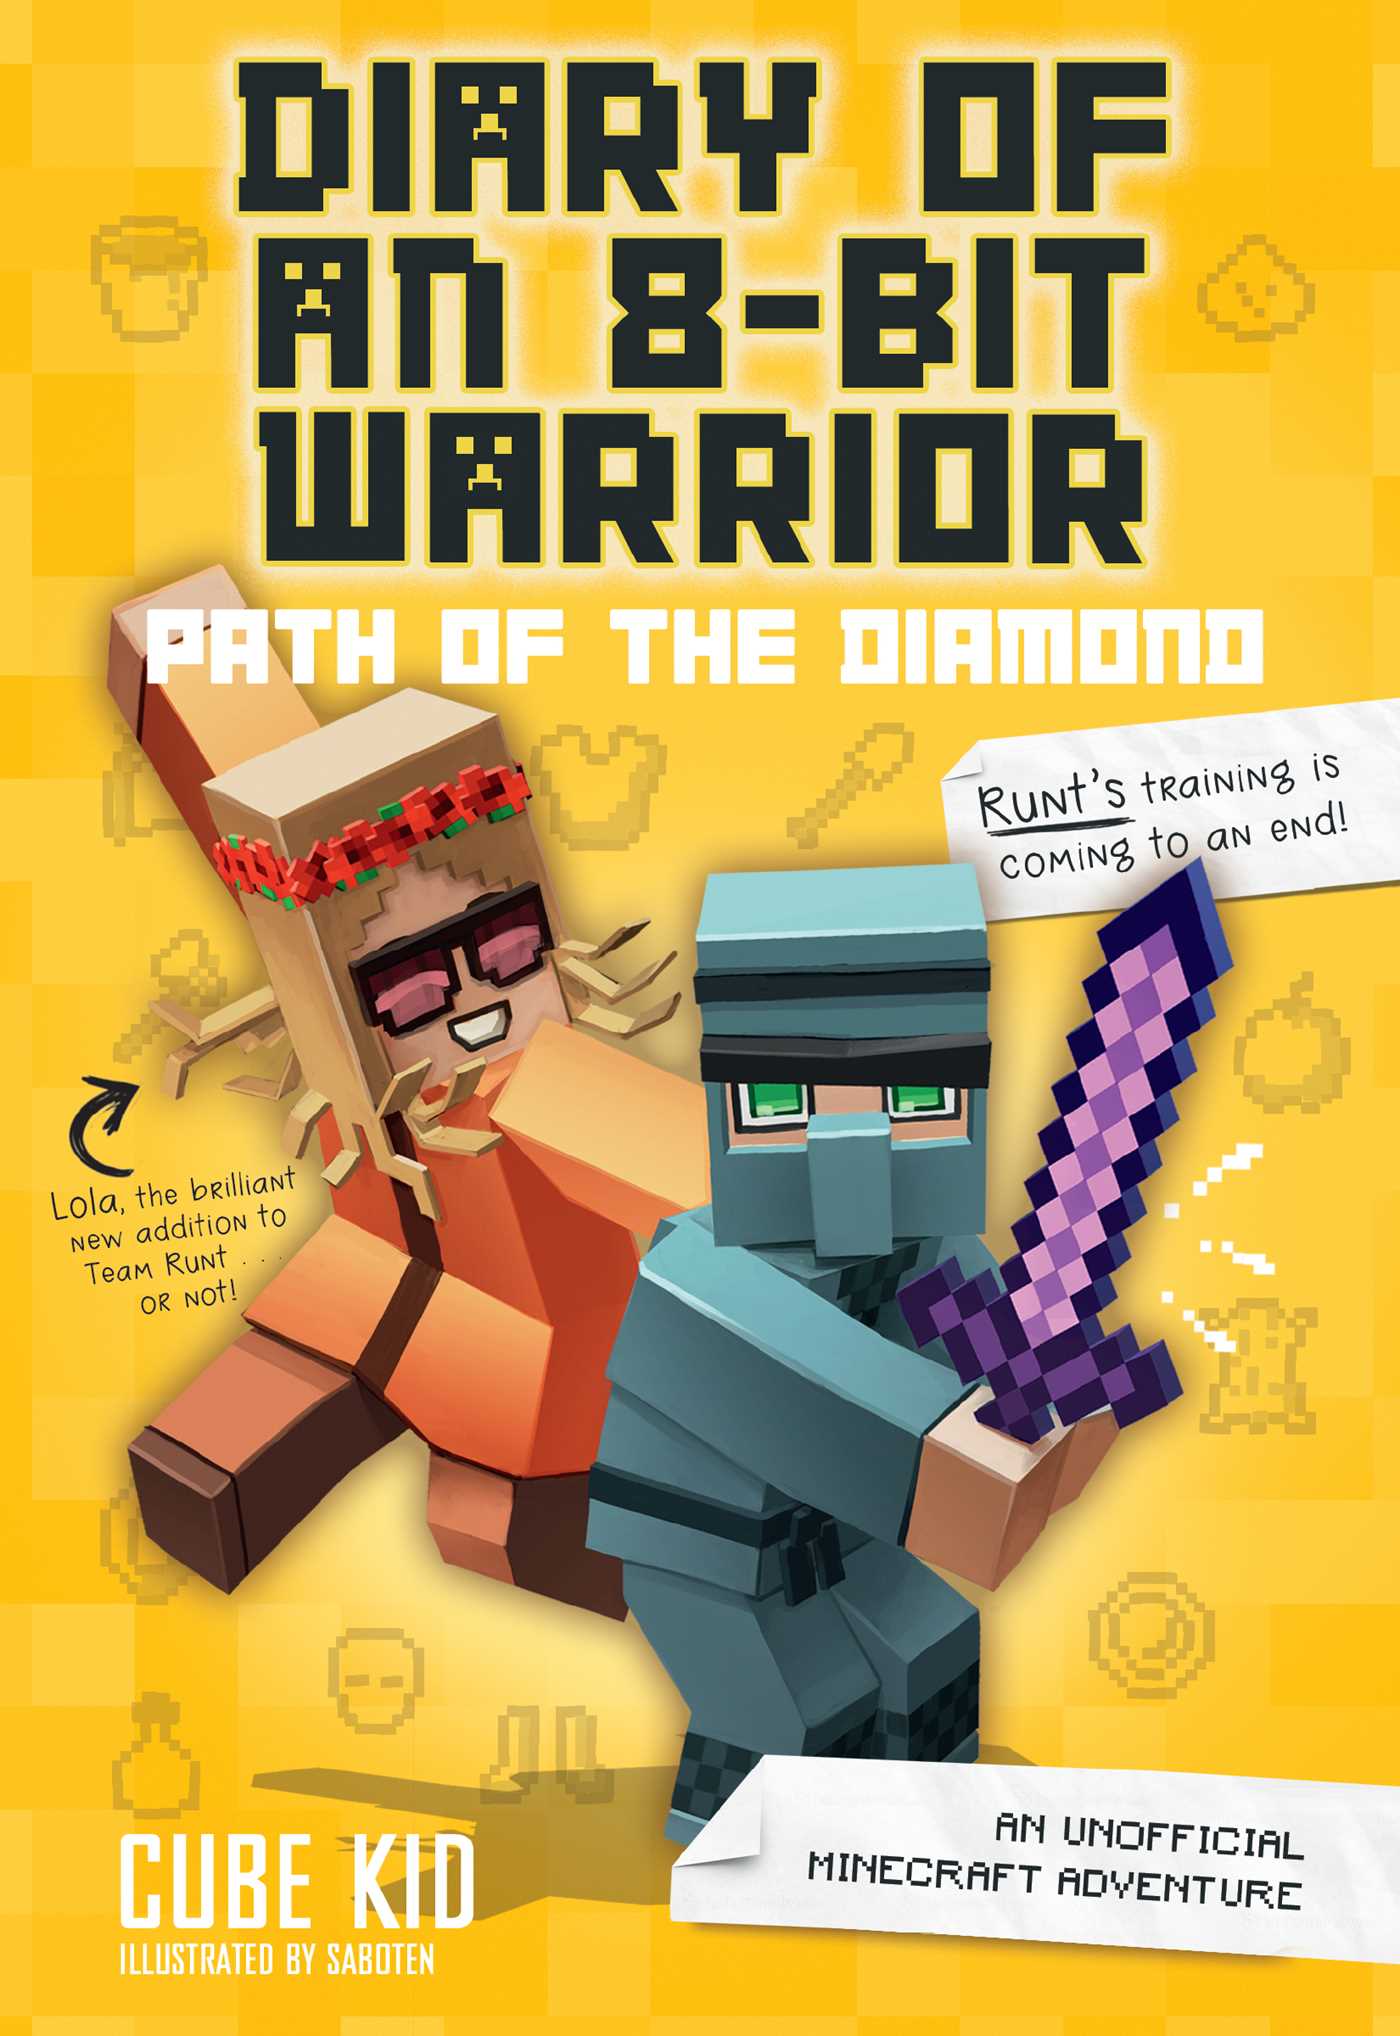 Diary of an 8-Bit Warrior: Path of the Diamond (Book 4 8-Bit Warrior series) : An Unofficial Minecraft Adventure | 9-12 years old